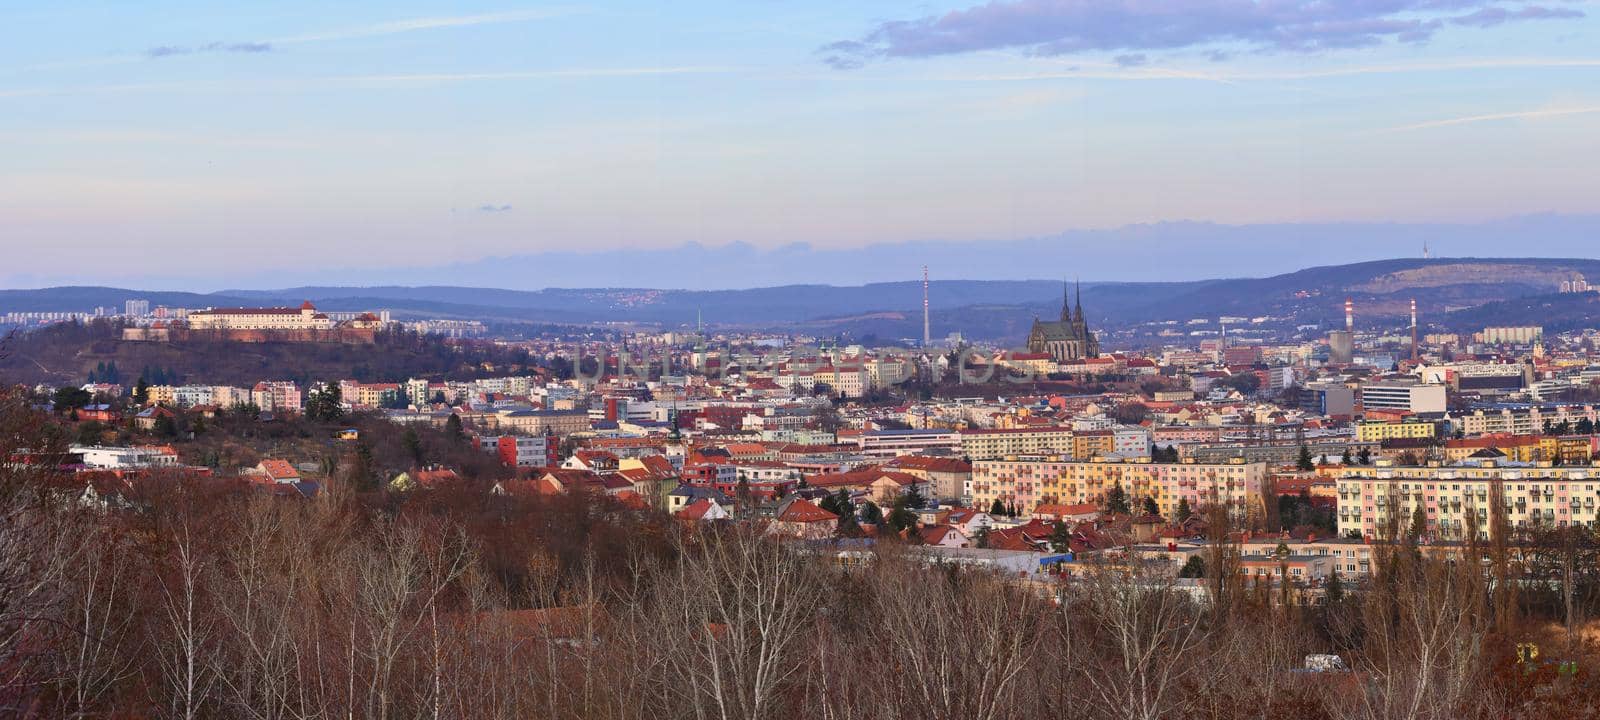 The city of Brno, Czech Republic-Europe. Top view of the city with monuments and roofs. panorama photo